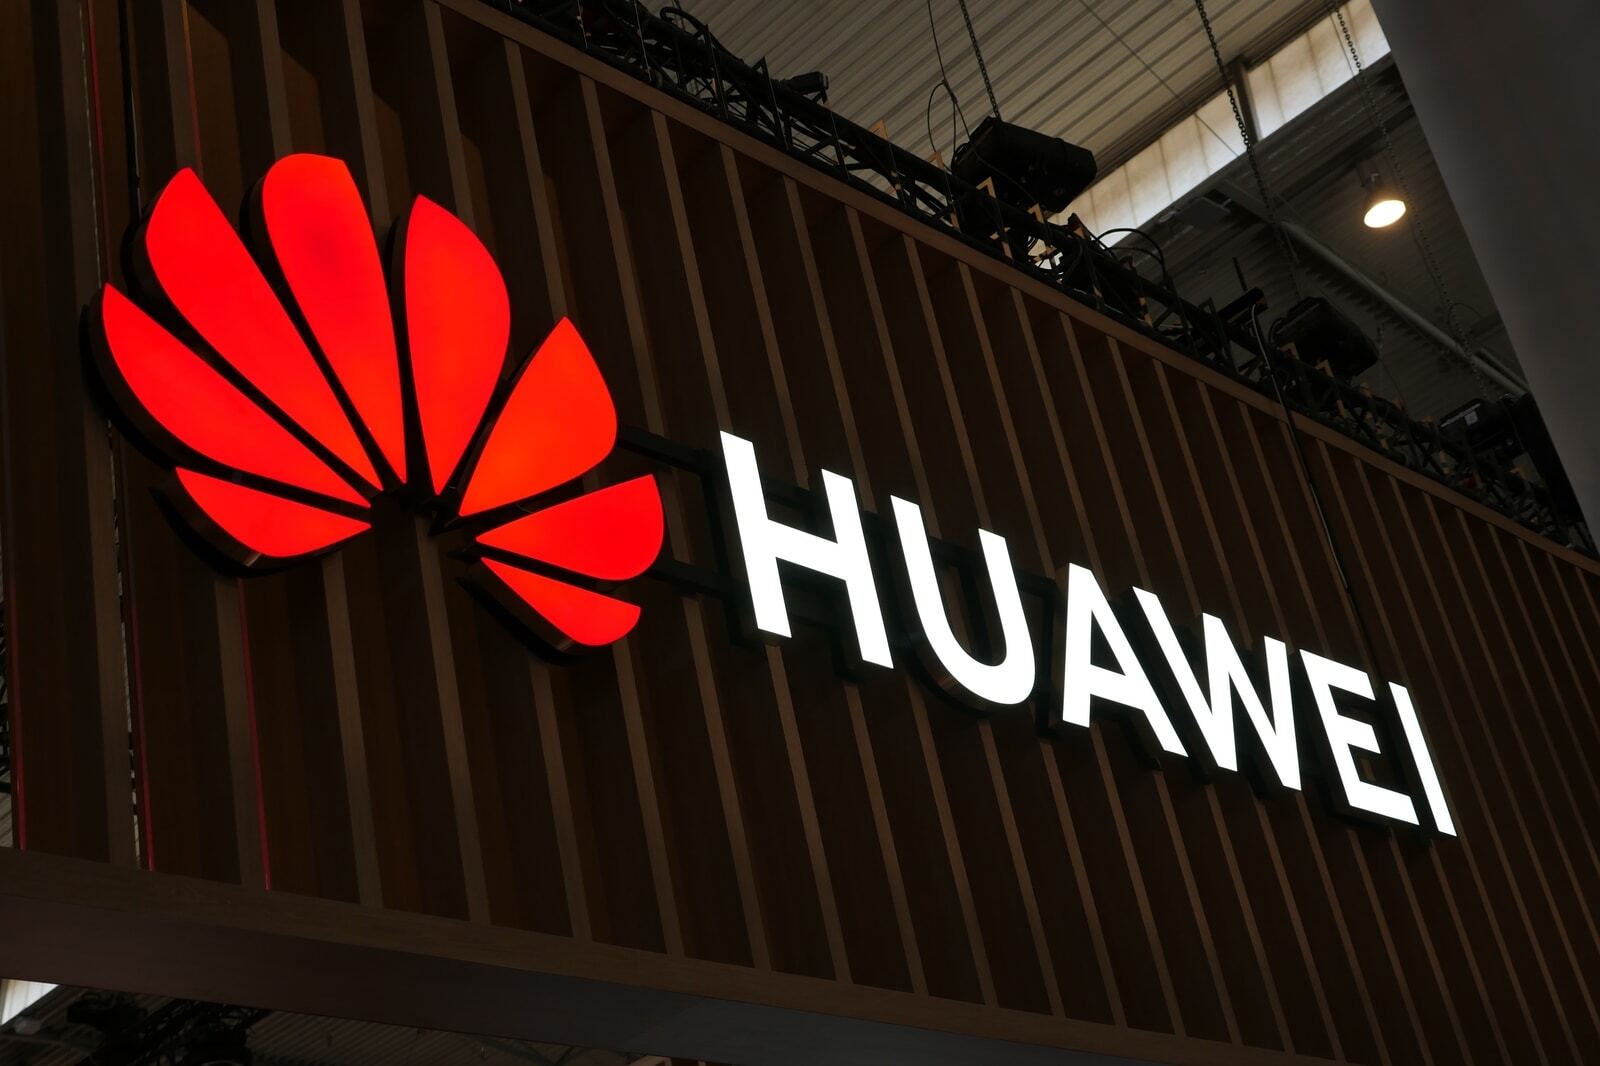 Last-minute Huawei P50 Pro leak details everything, including lack of 5G